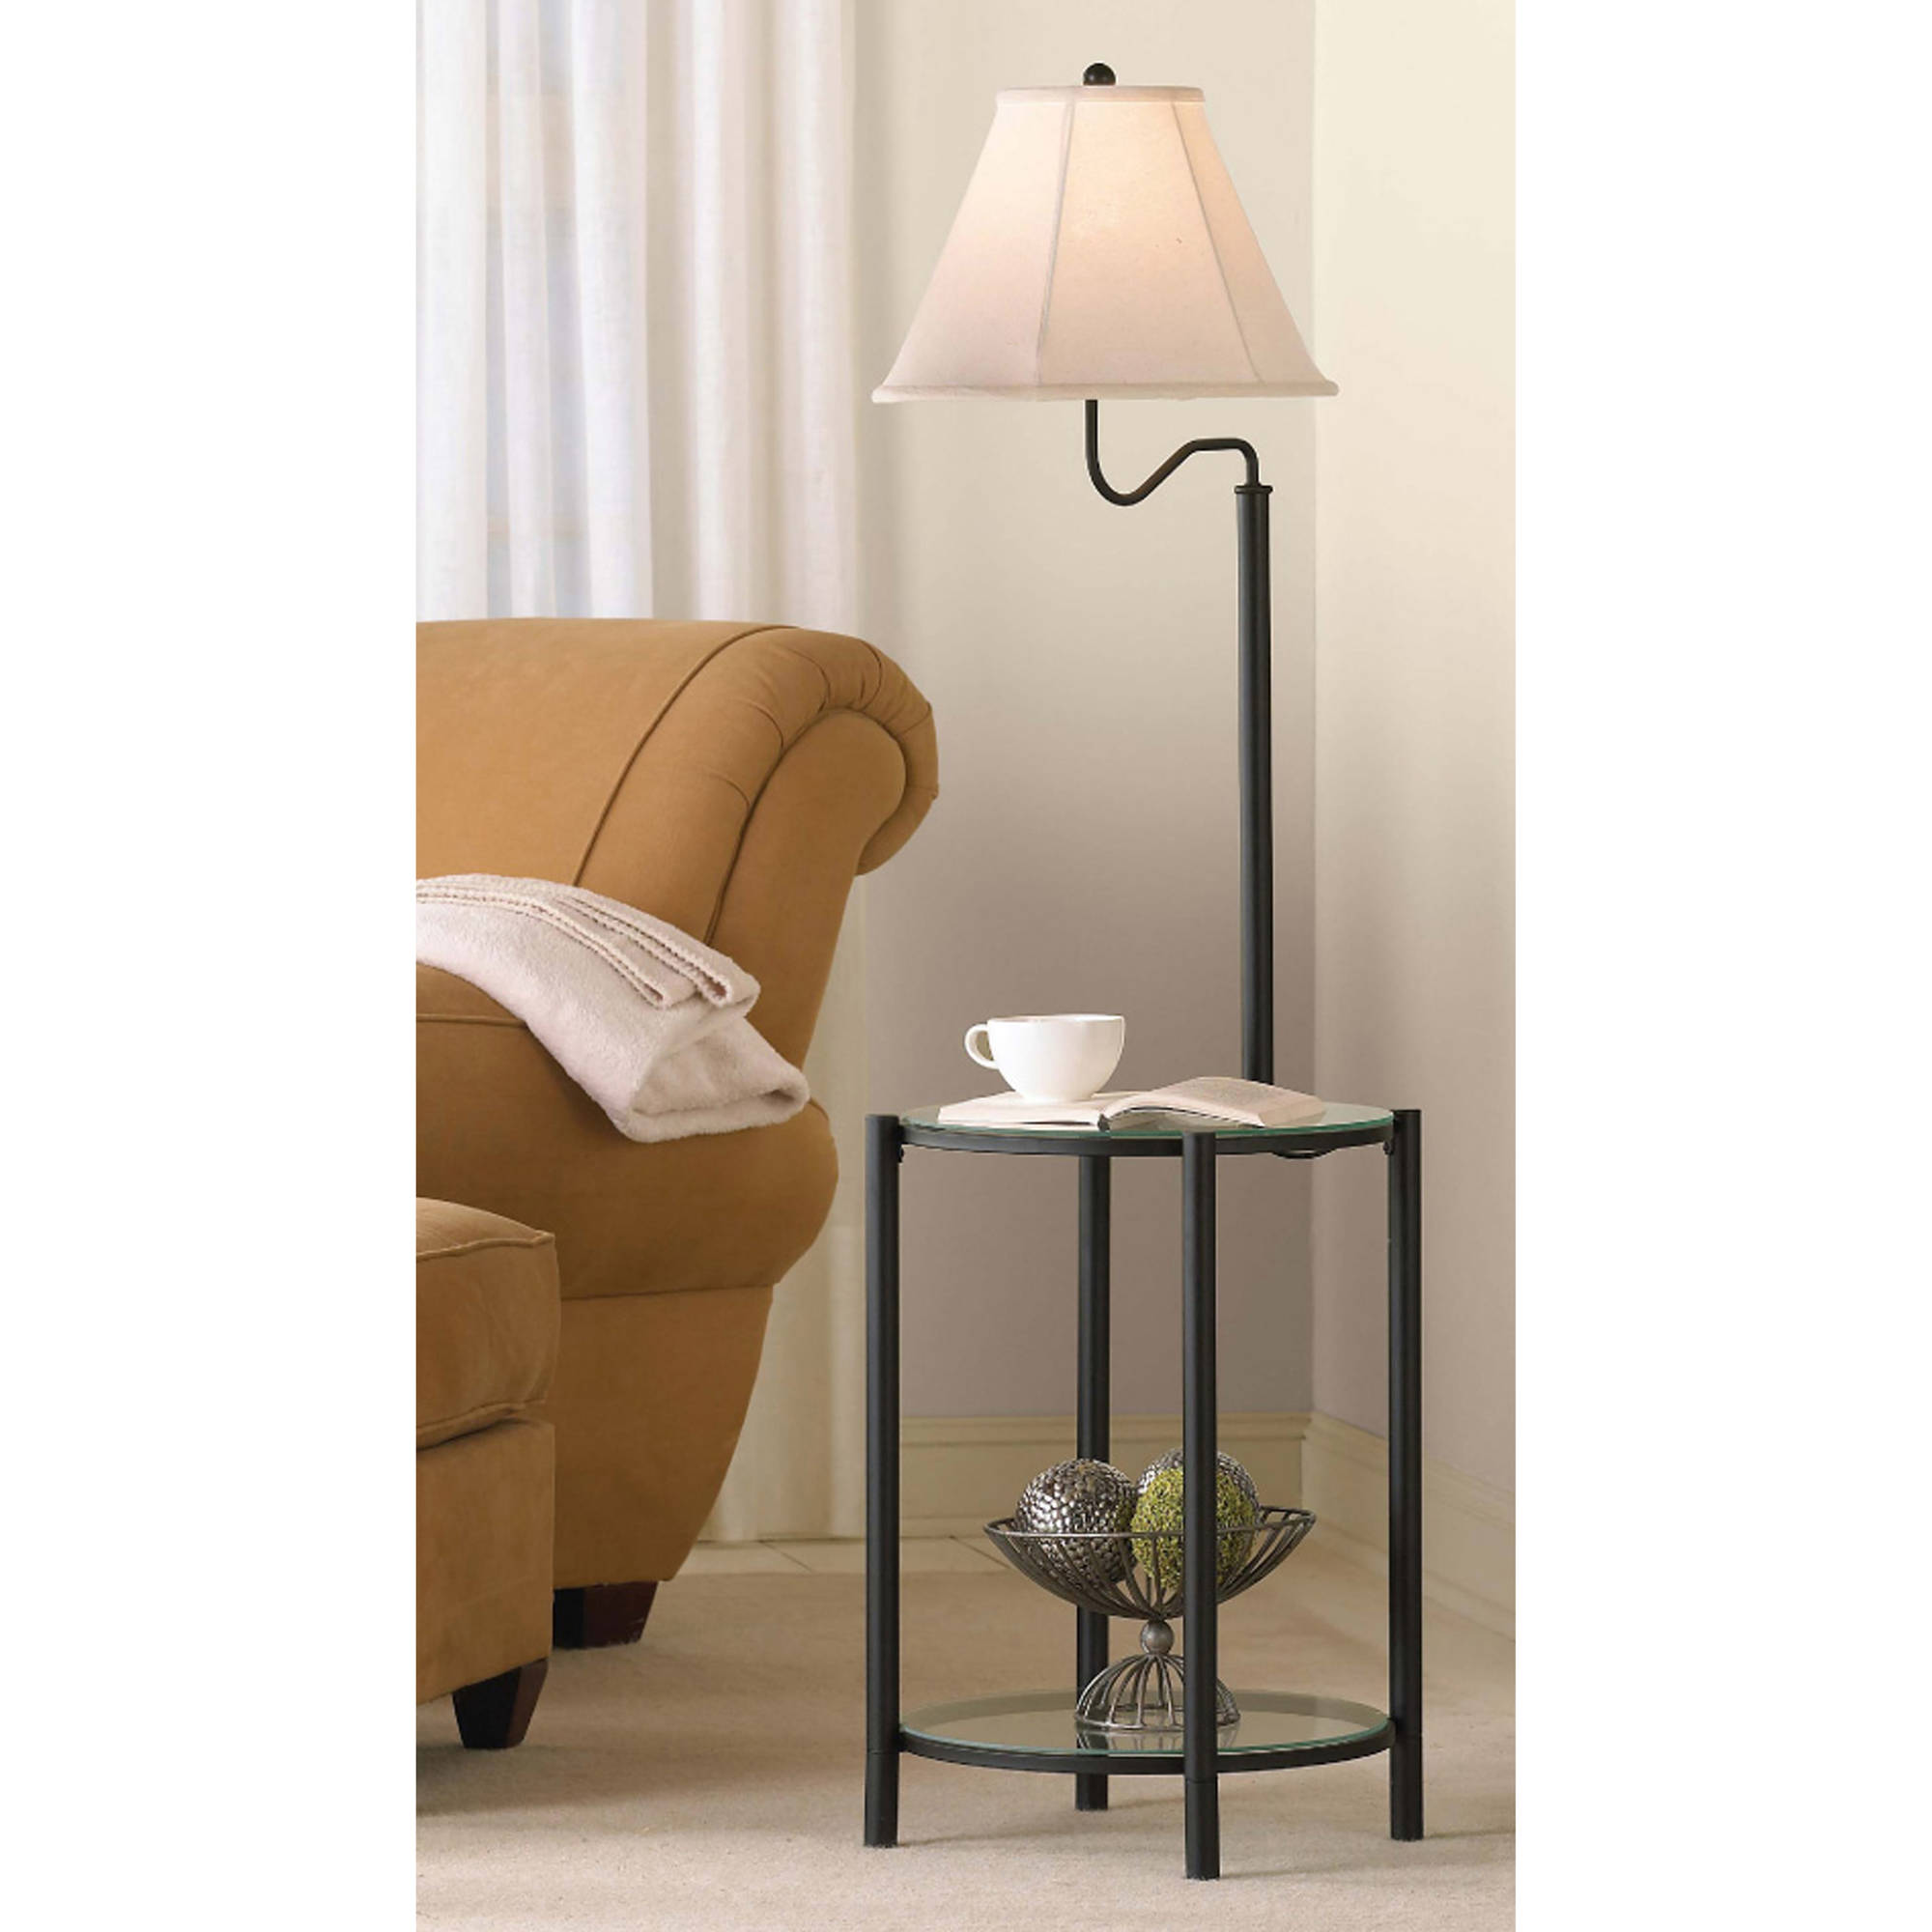 mainstays glass end table floor lamp matte black cfl bulb included accent under folding pier lamps one rattan small nest tables cool retro bedroom furniture bronze frog deck west